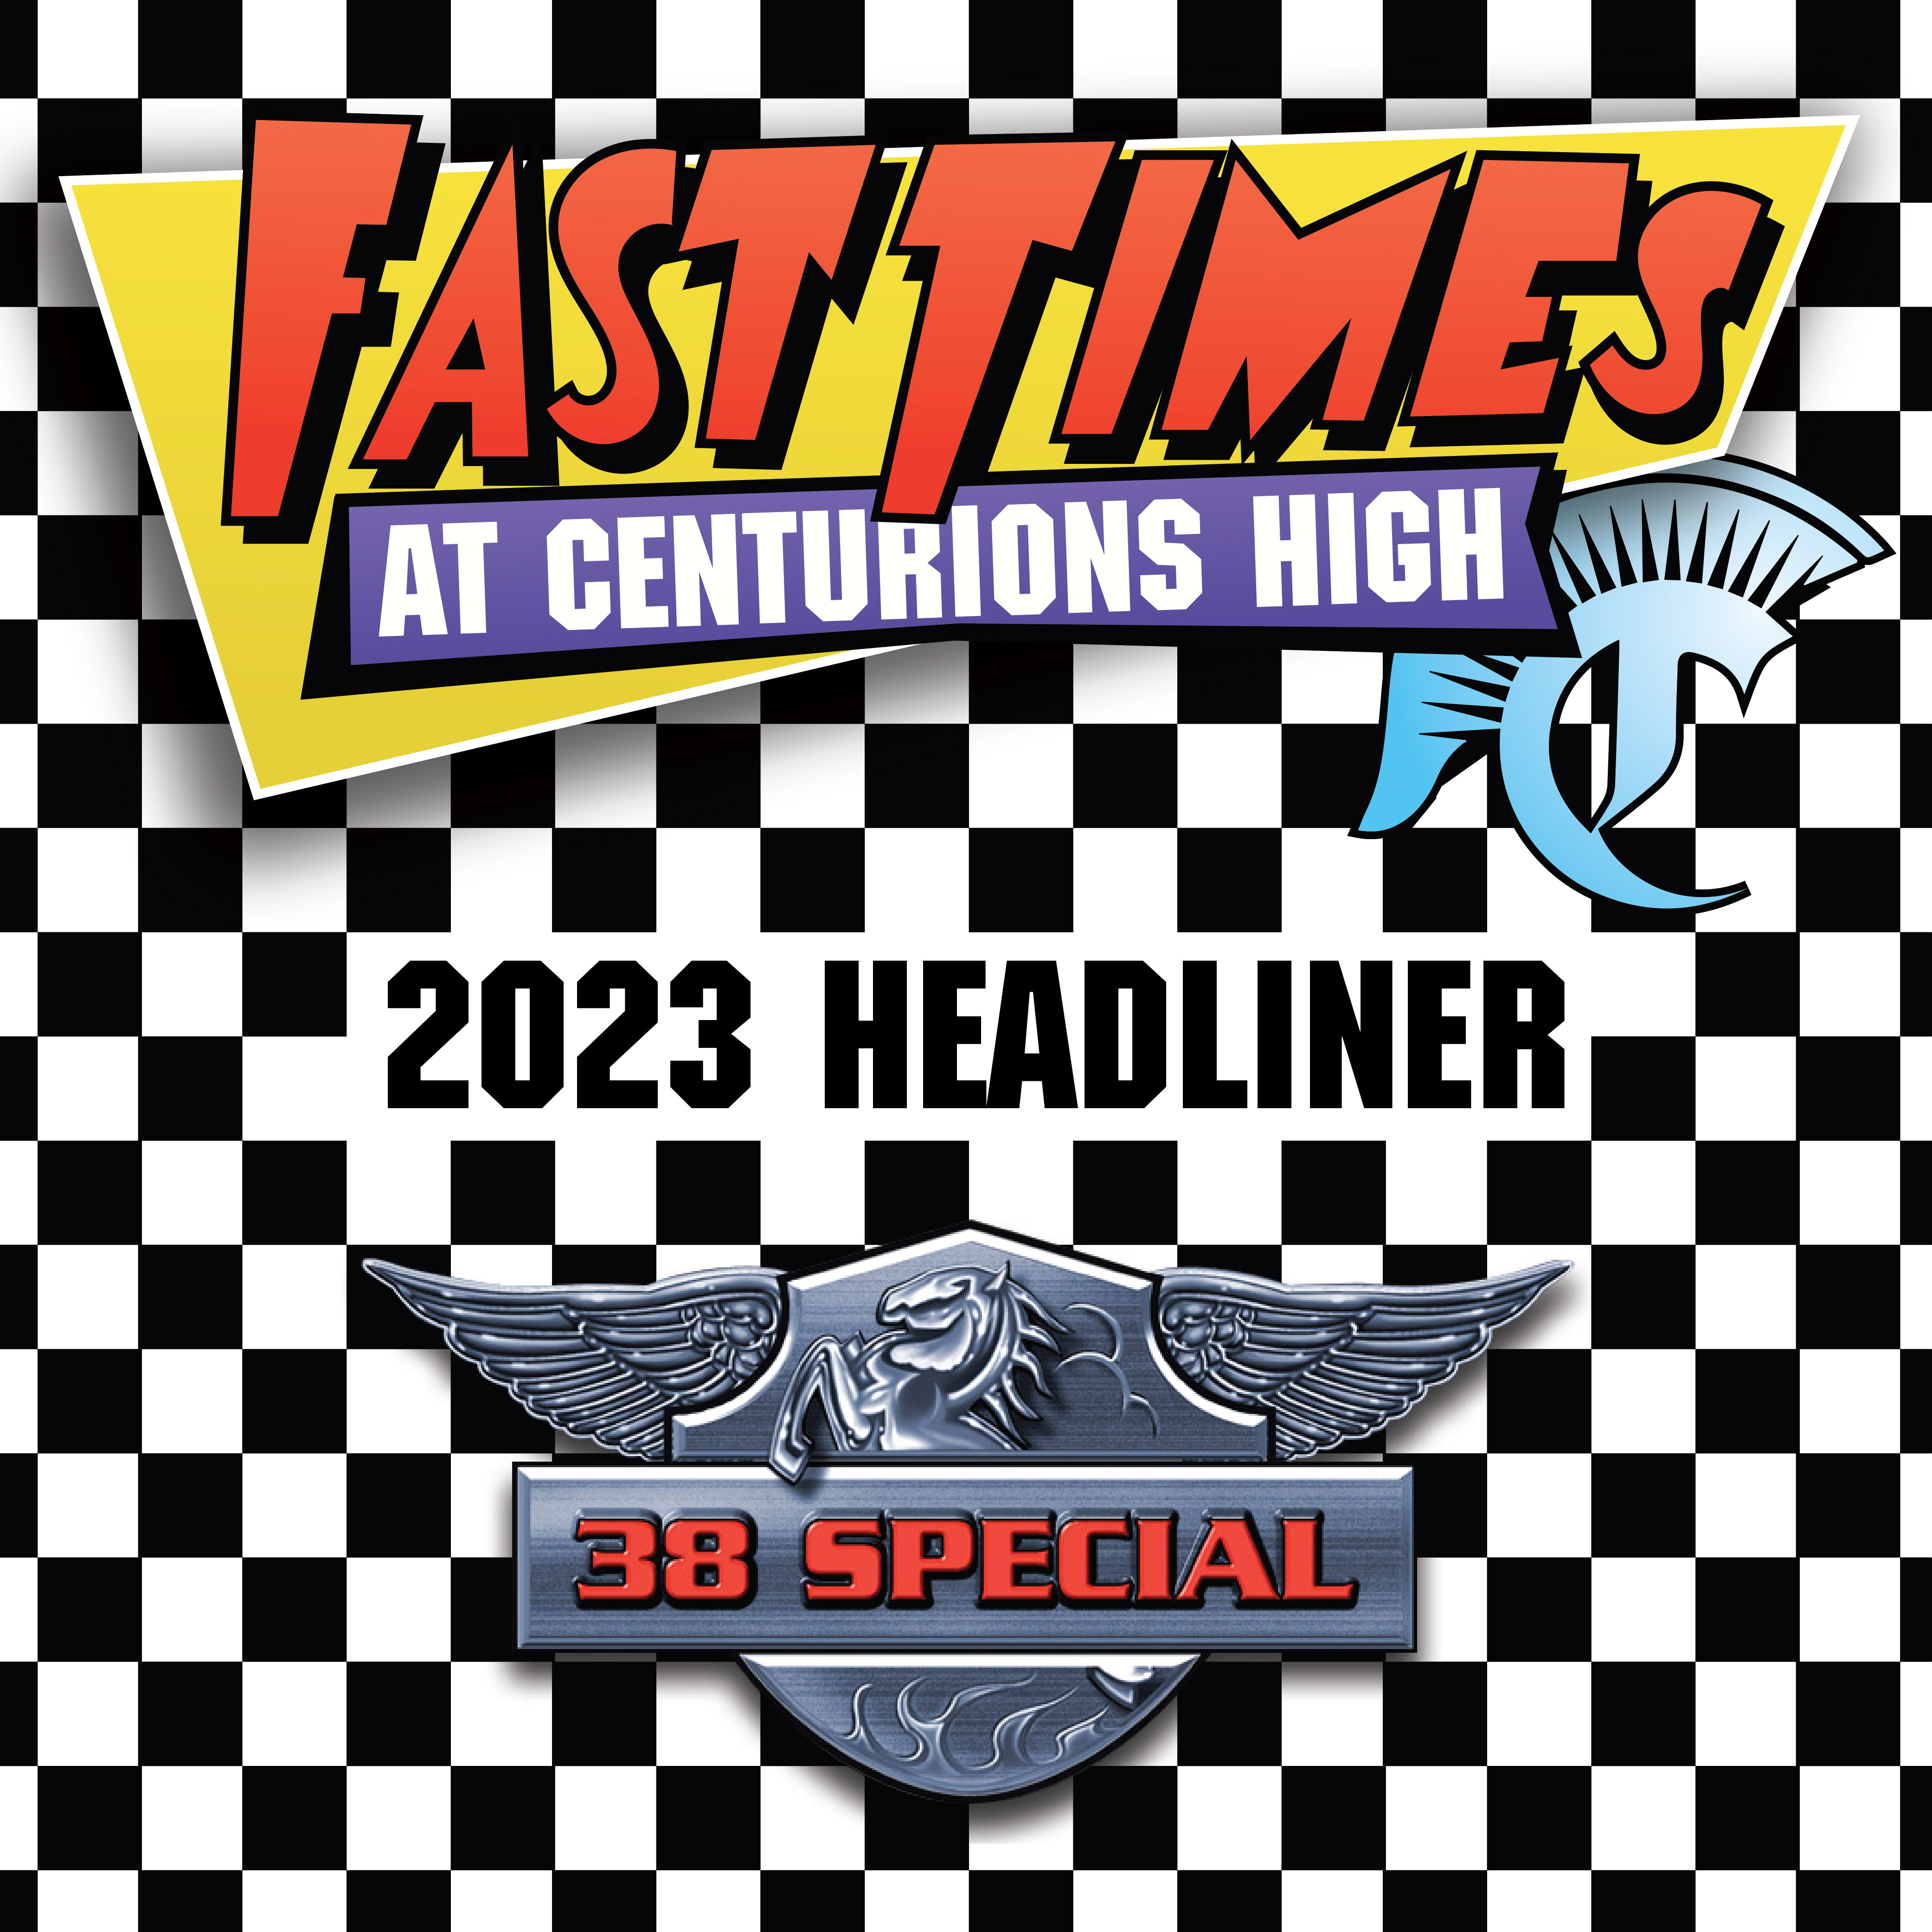 Buy Tickets to Fast Times at Centurions High in Tucson on Apr 29, 2023